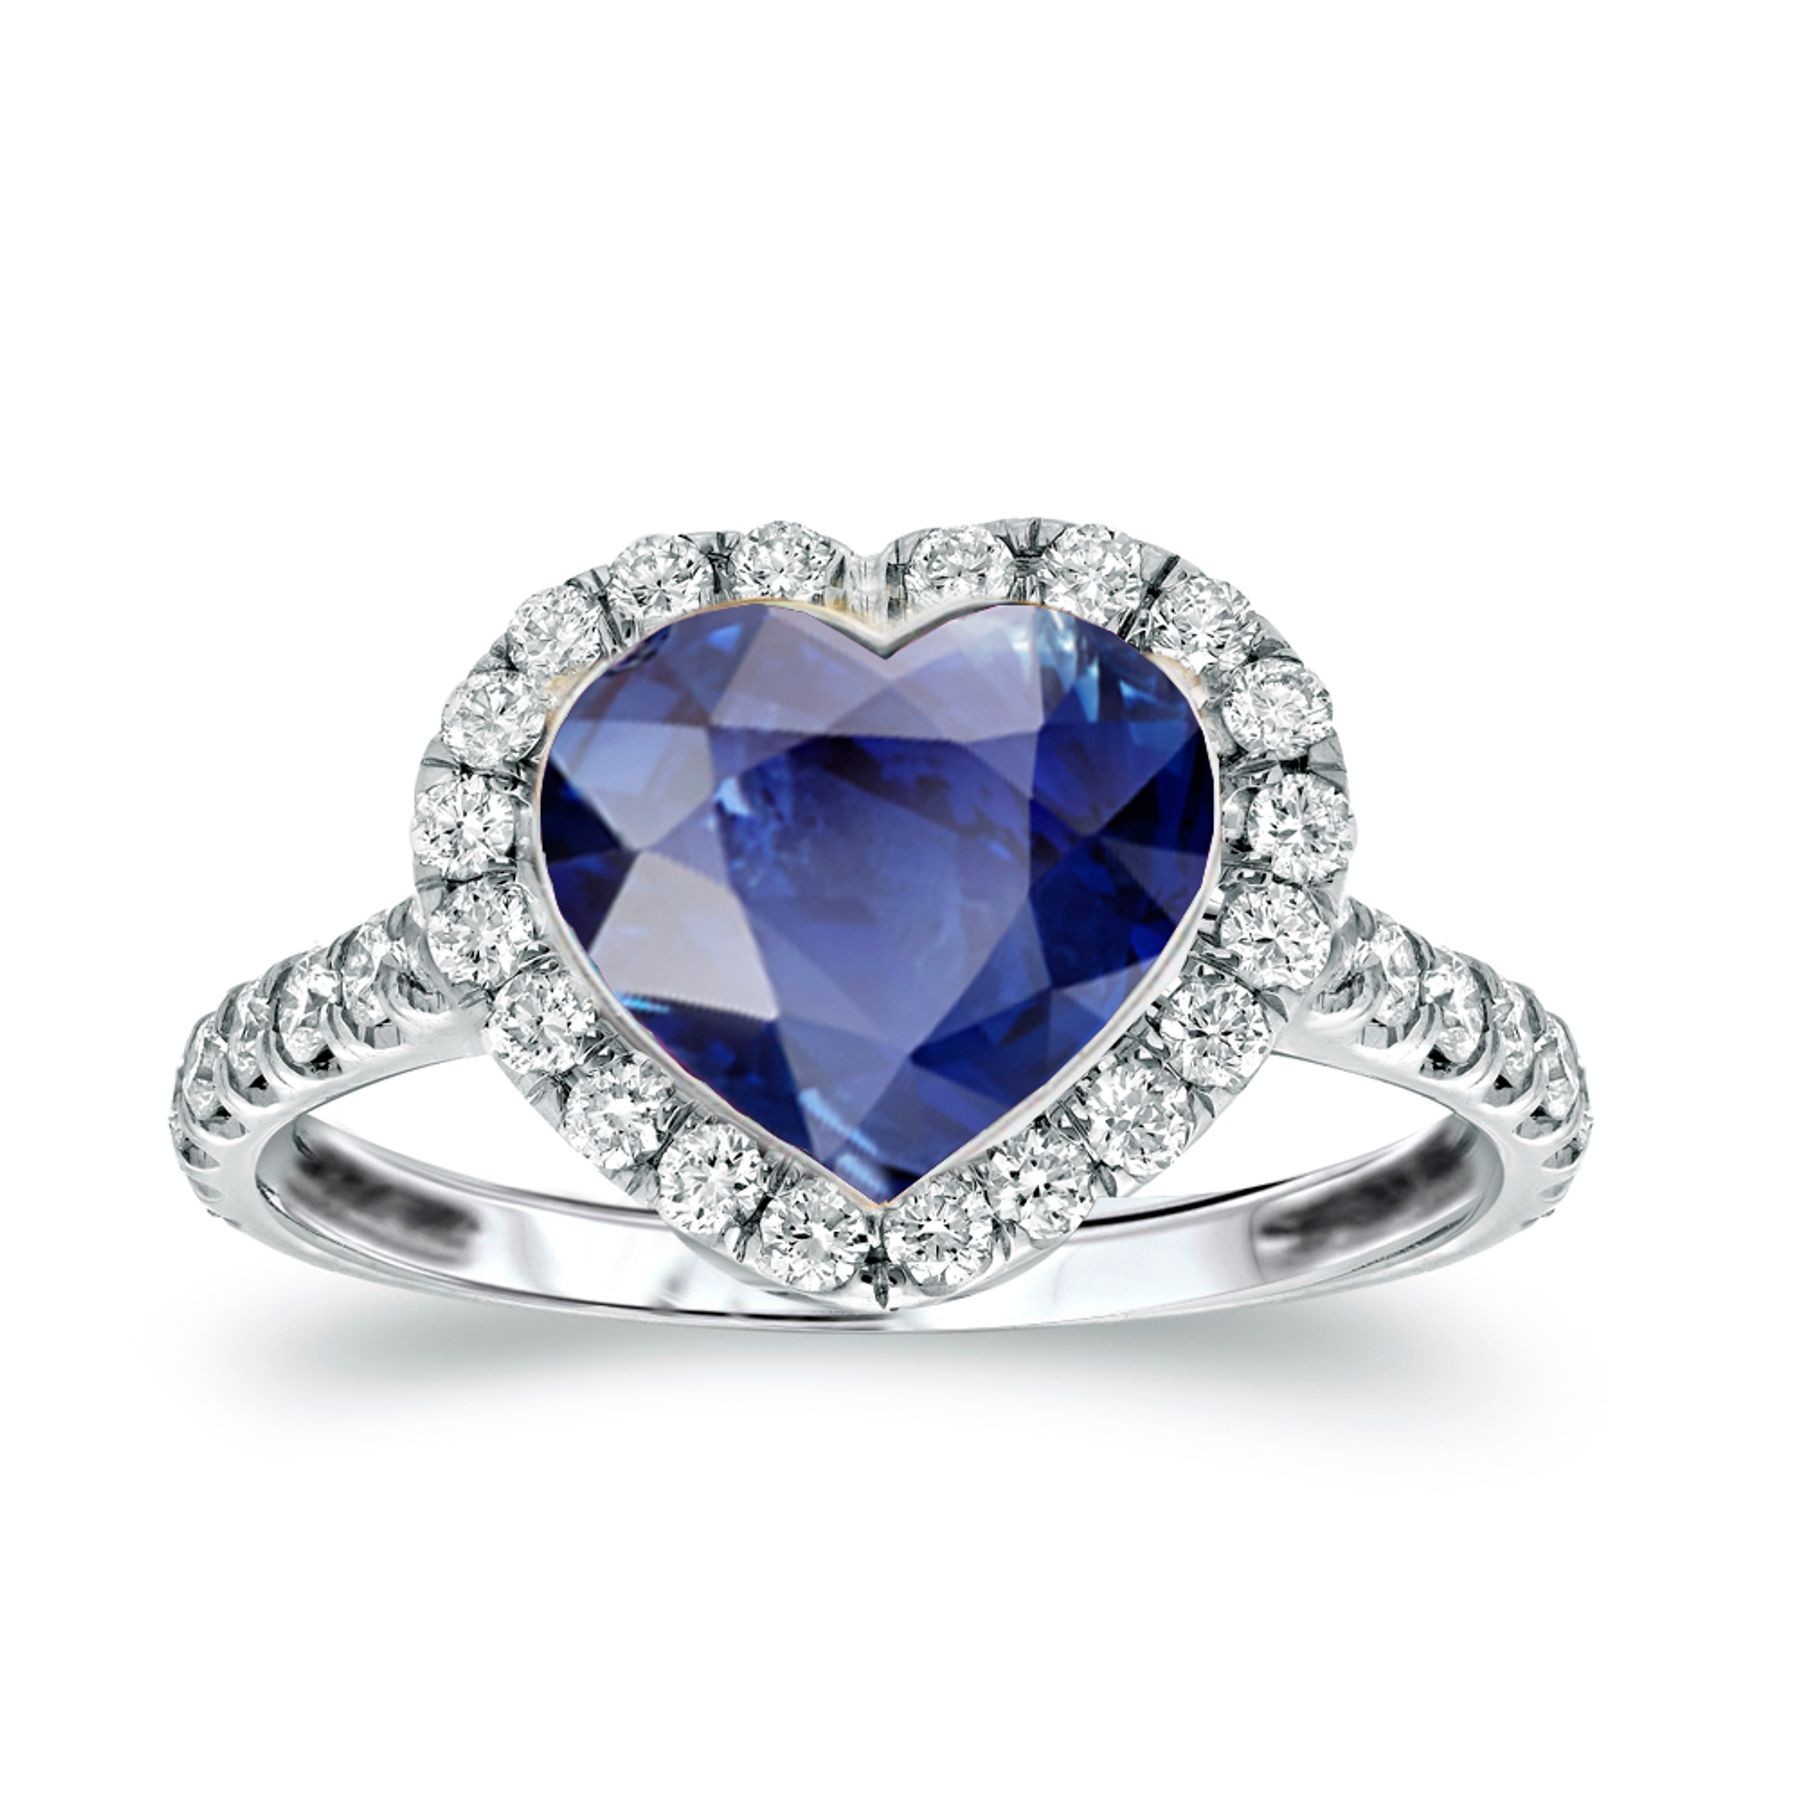 Made to Order Just For You Delicate Micro Pave Halo Diamonds & Heart Blue Sapphire Ring